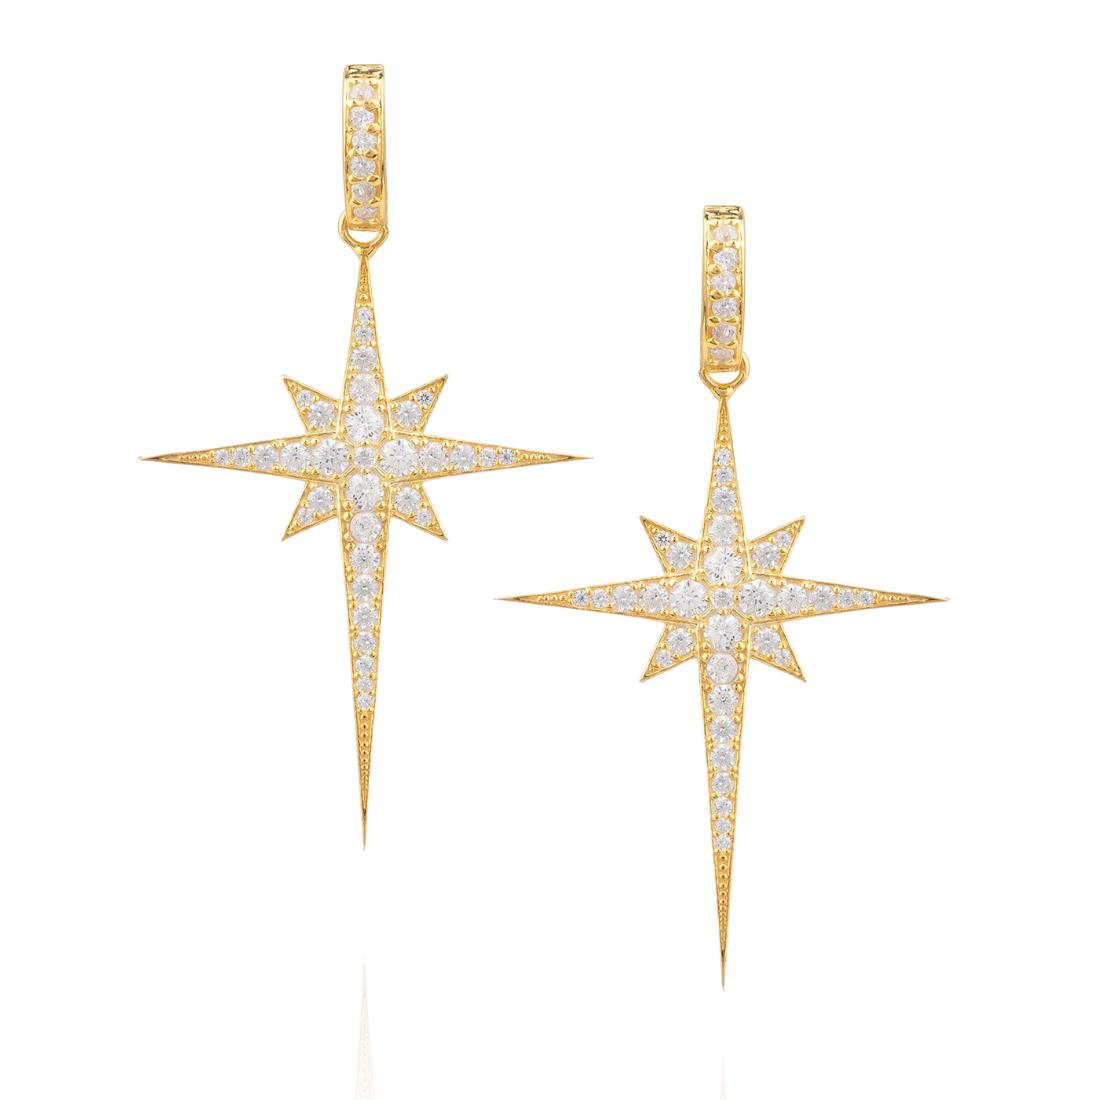 North Starburst large drop earrings in gold